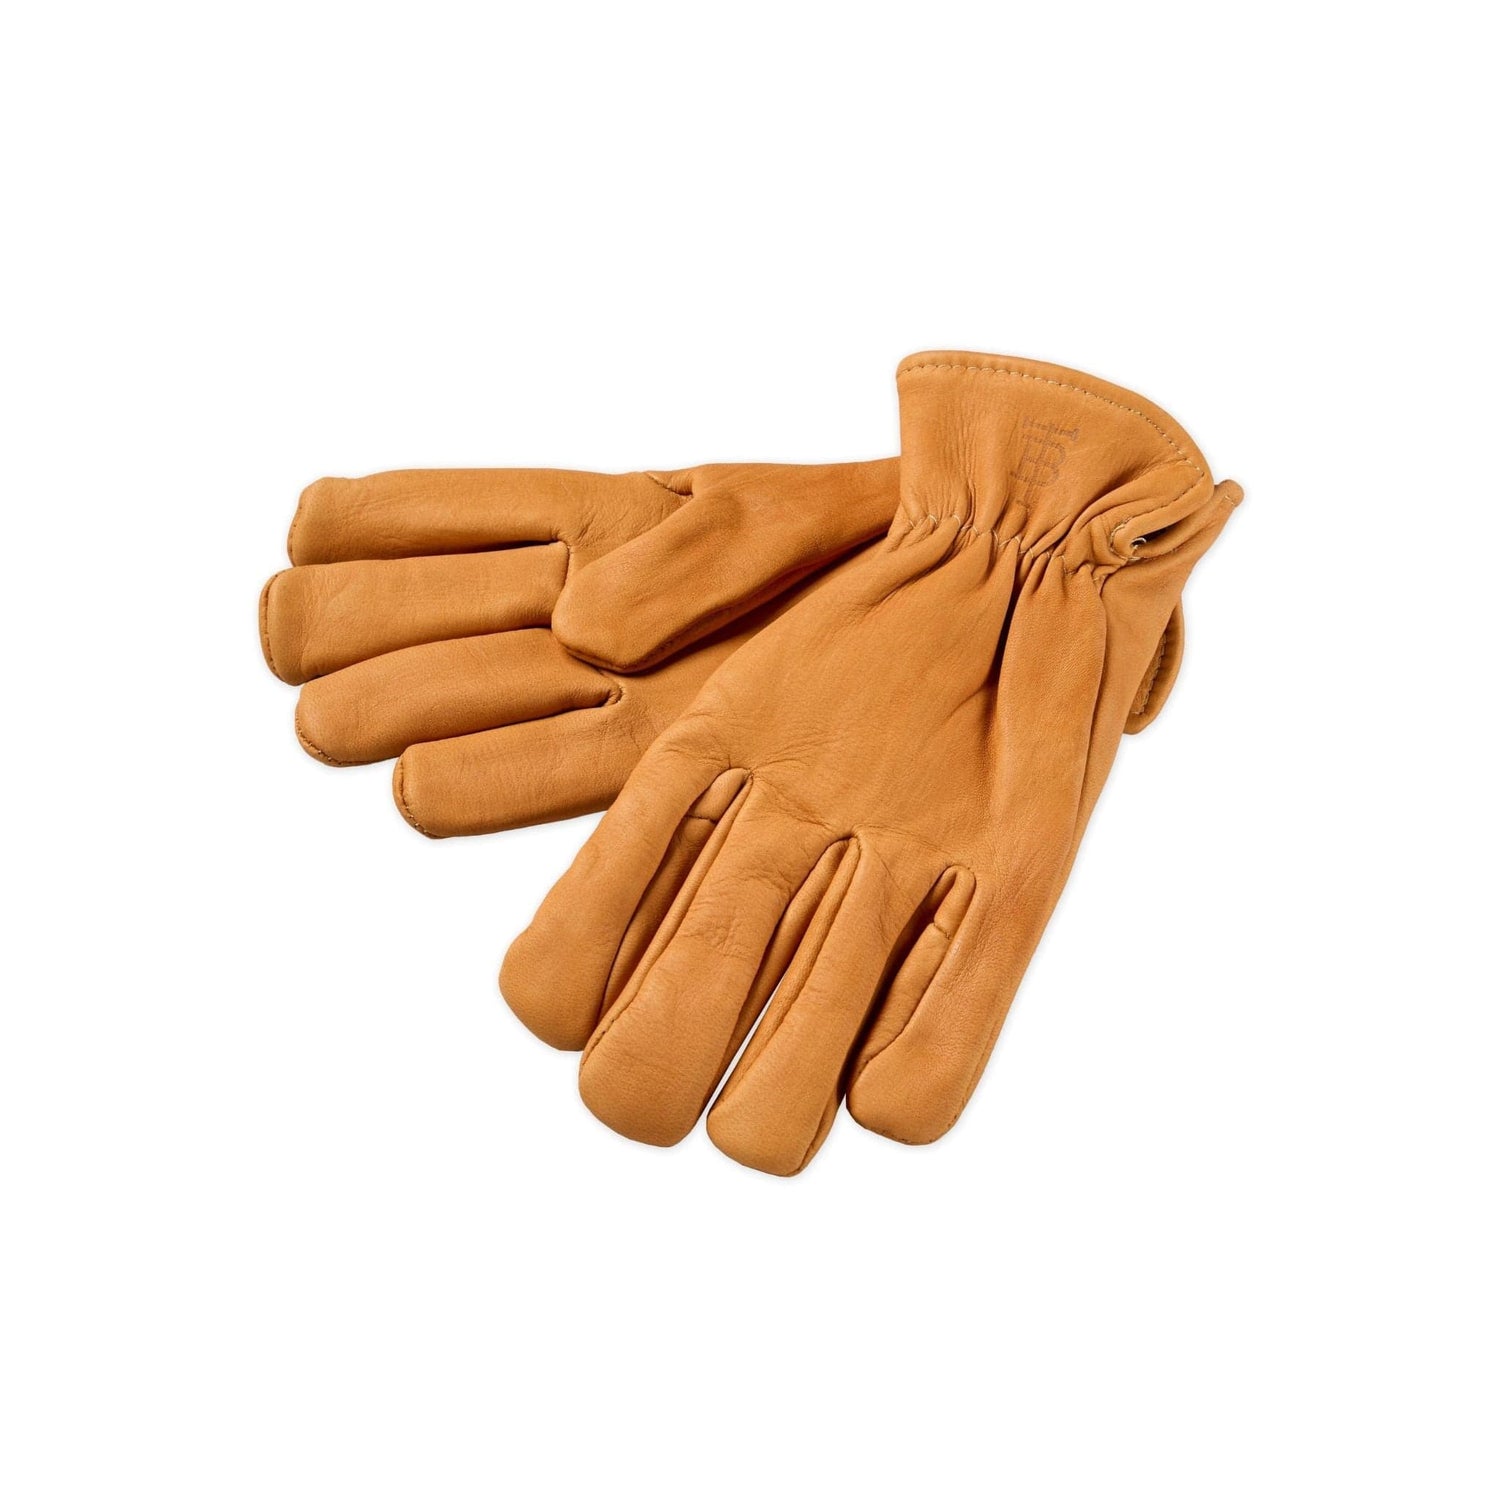 Insulated Leather Shooting Gloves – Tom Beckbe